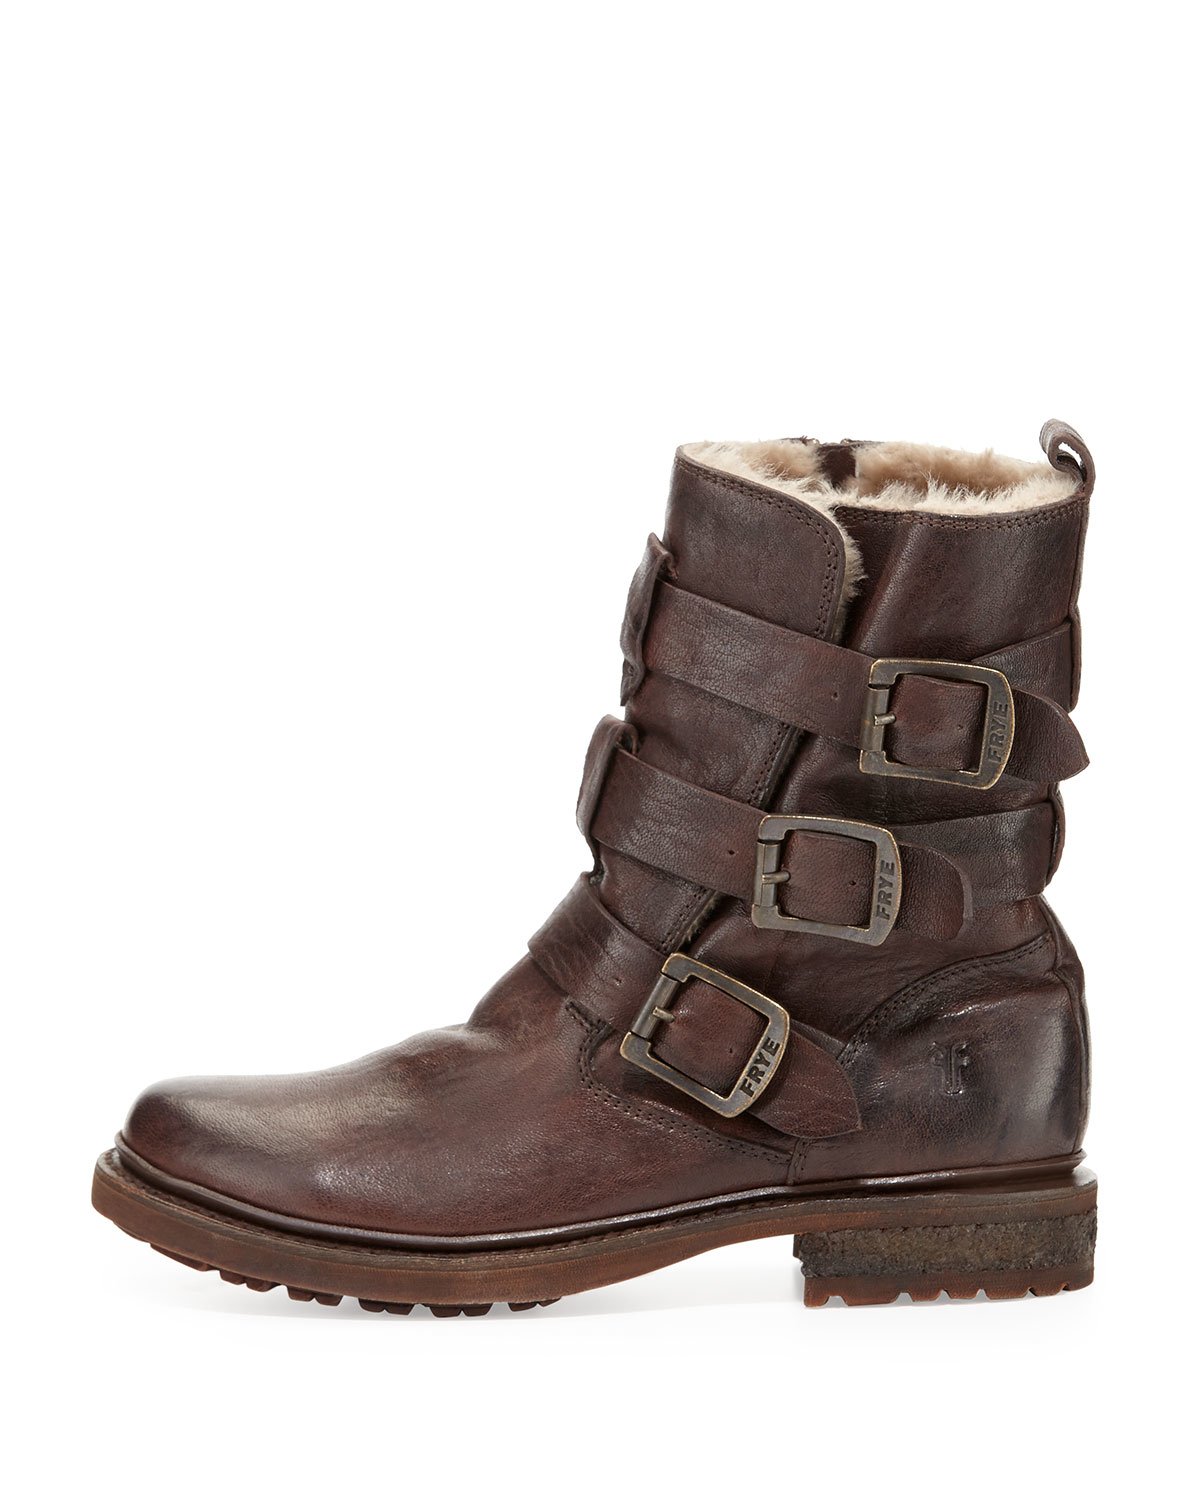 Lyst - Frye Valerie Shearling-lined Buckle Boot in Brown